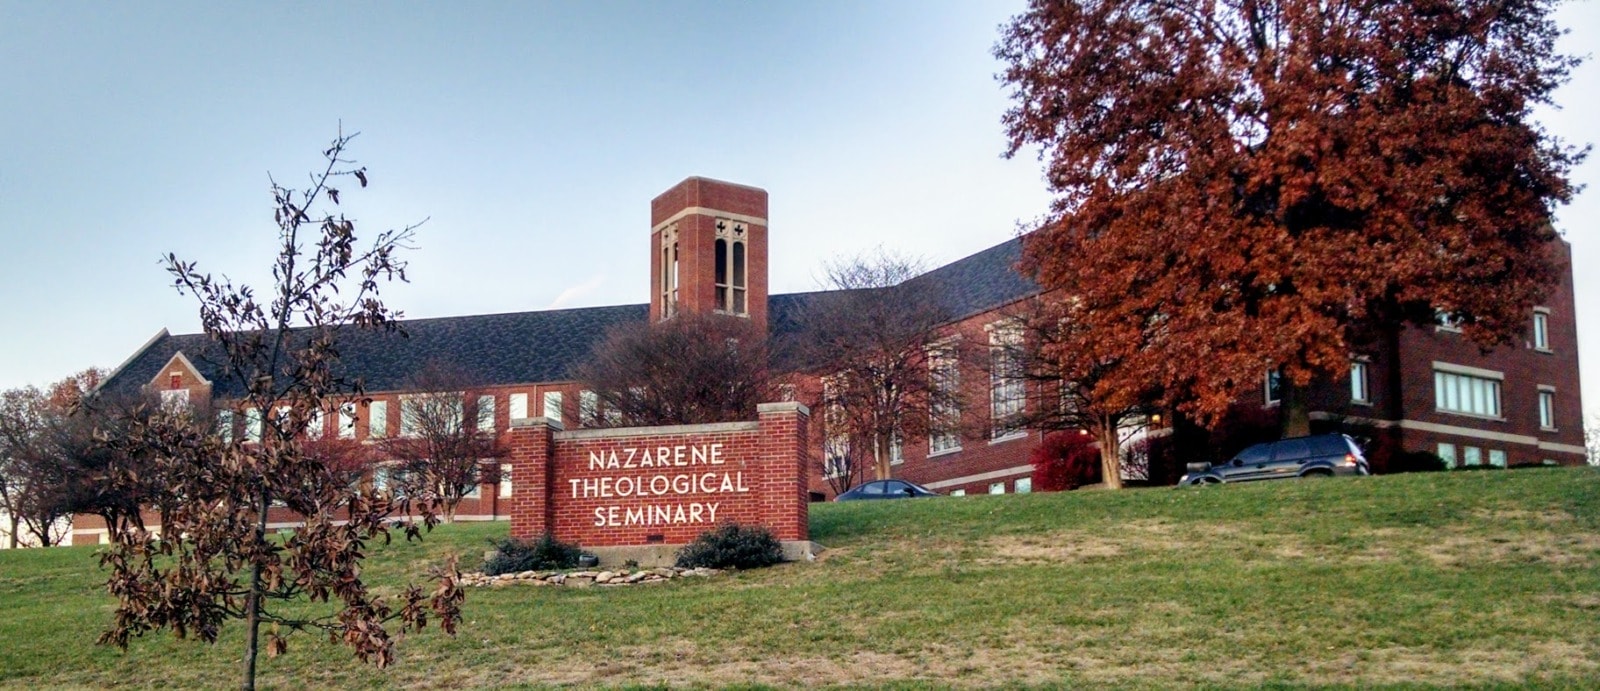 Buildings in the metro area used for religious purposes include several theological seminaries, including this one near 63rd and the Paseo operated by the Church of the Nazarene.